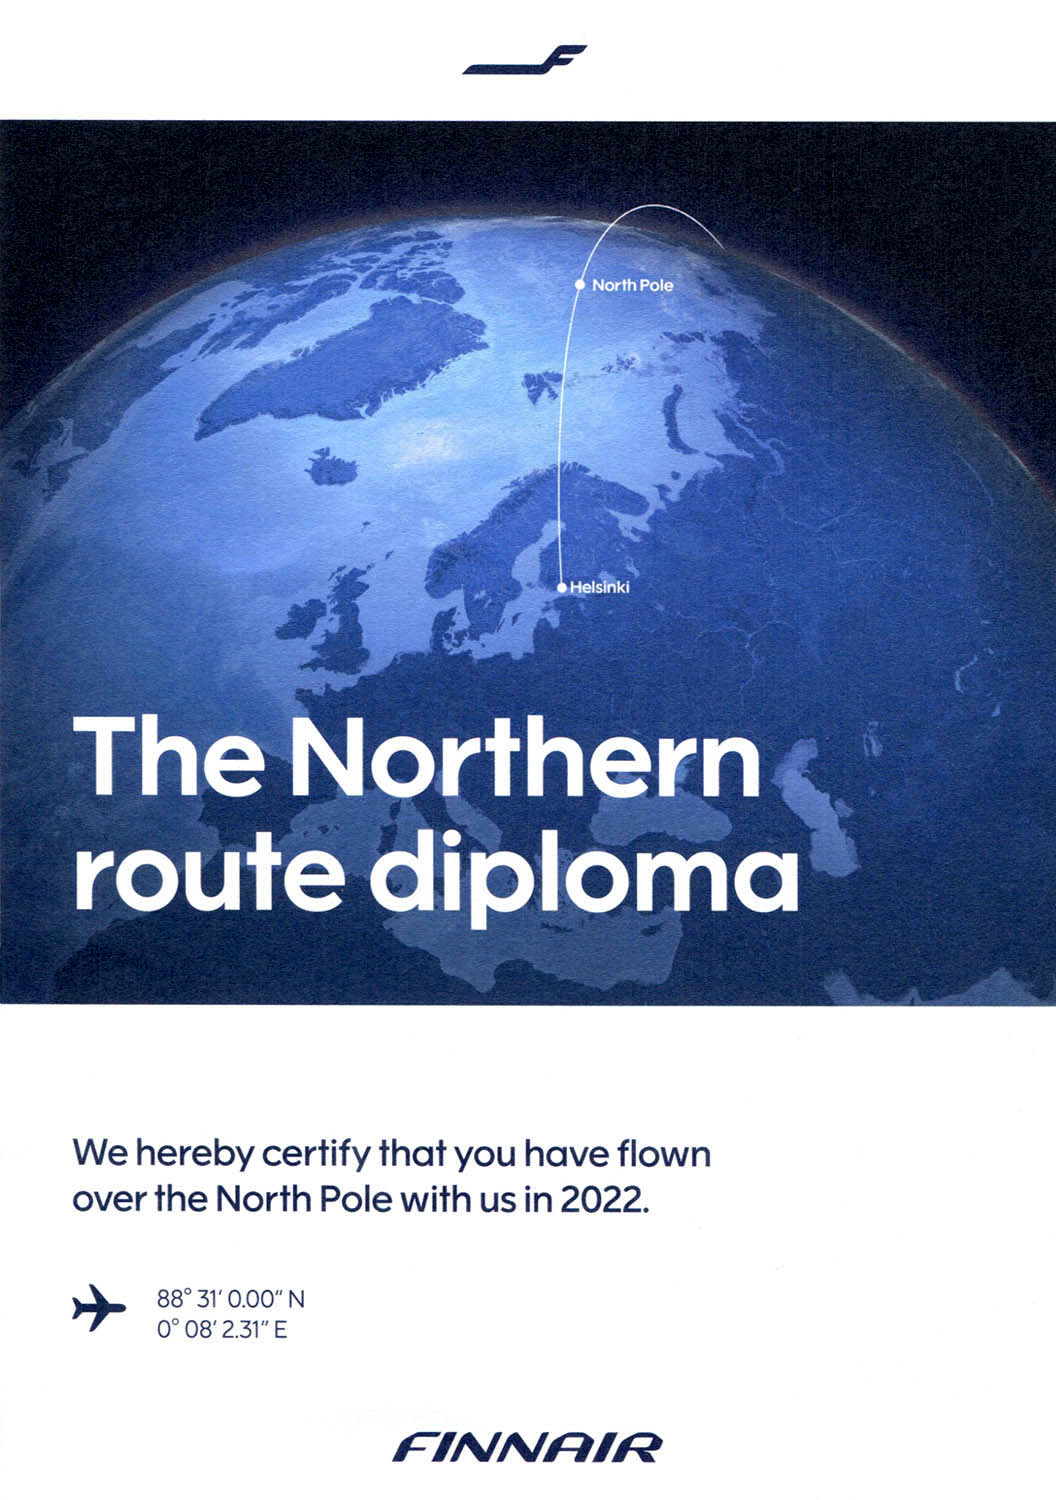 The Northern Route Diploma by Finnair 2022